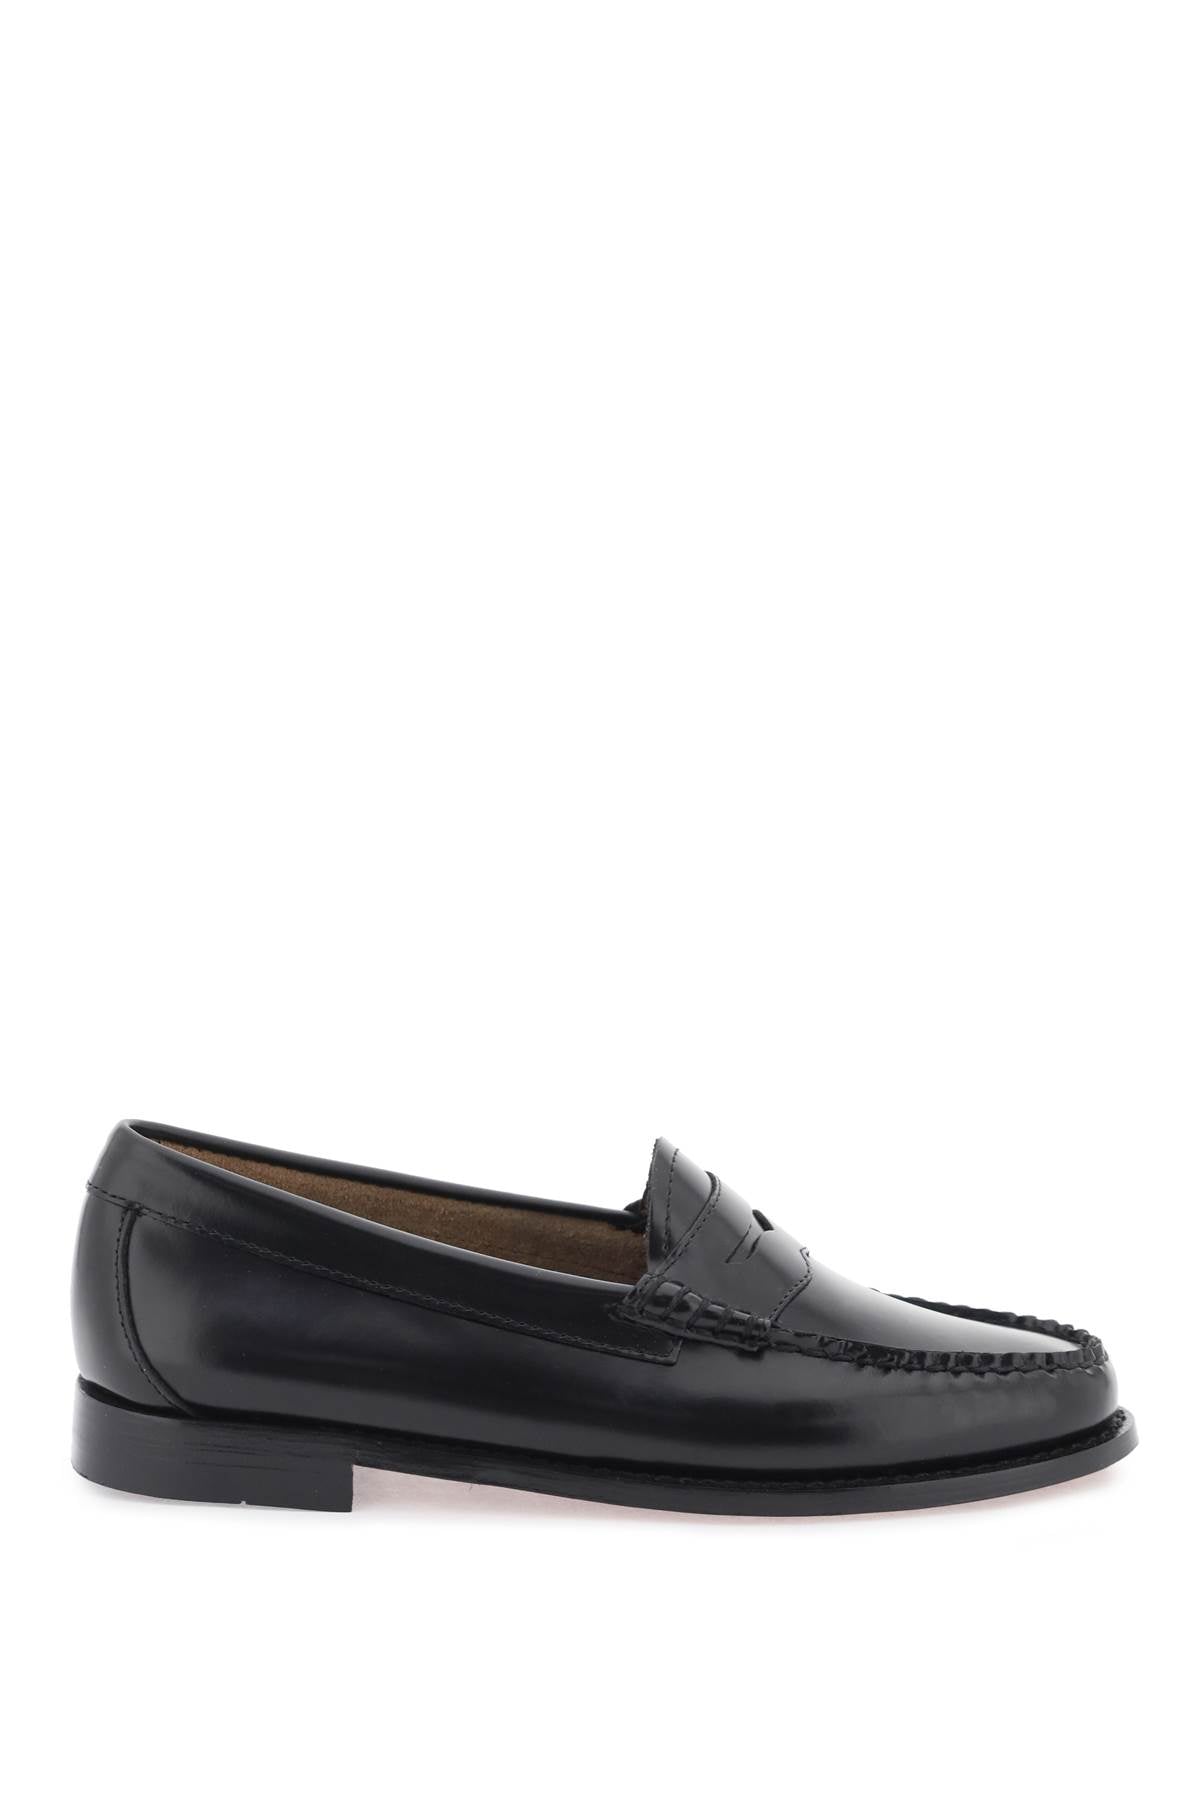 weejuns penny loafers BA41010 BLACK